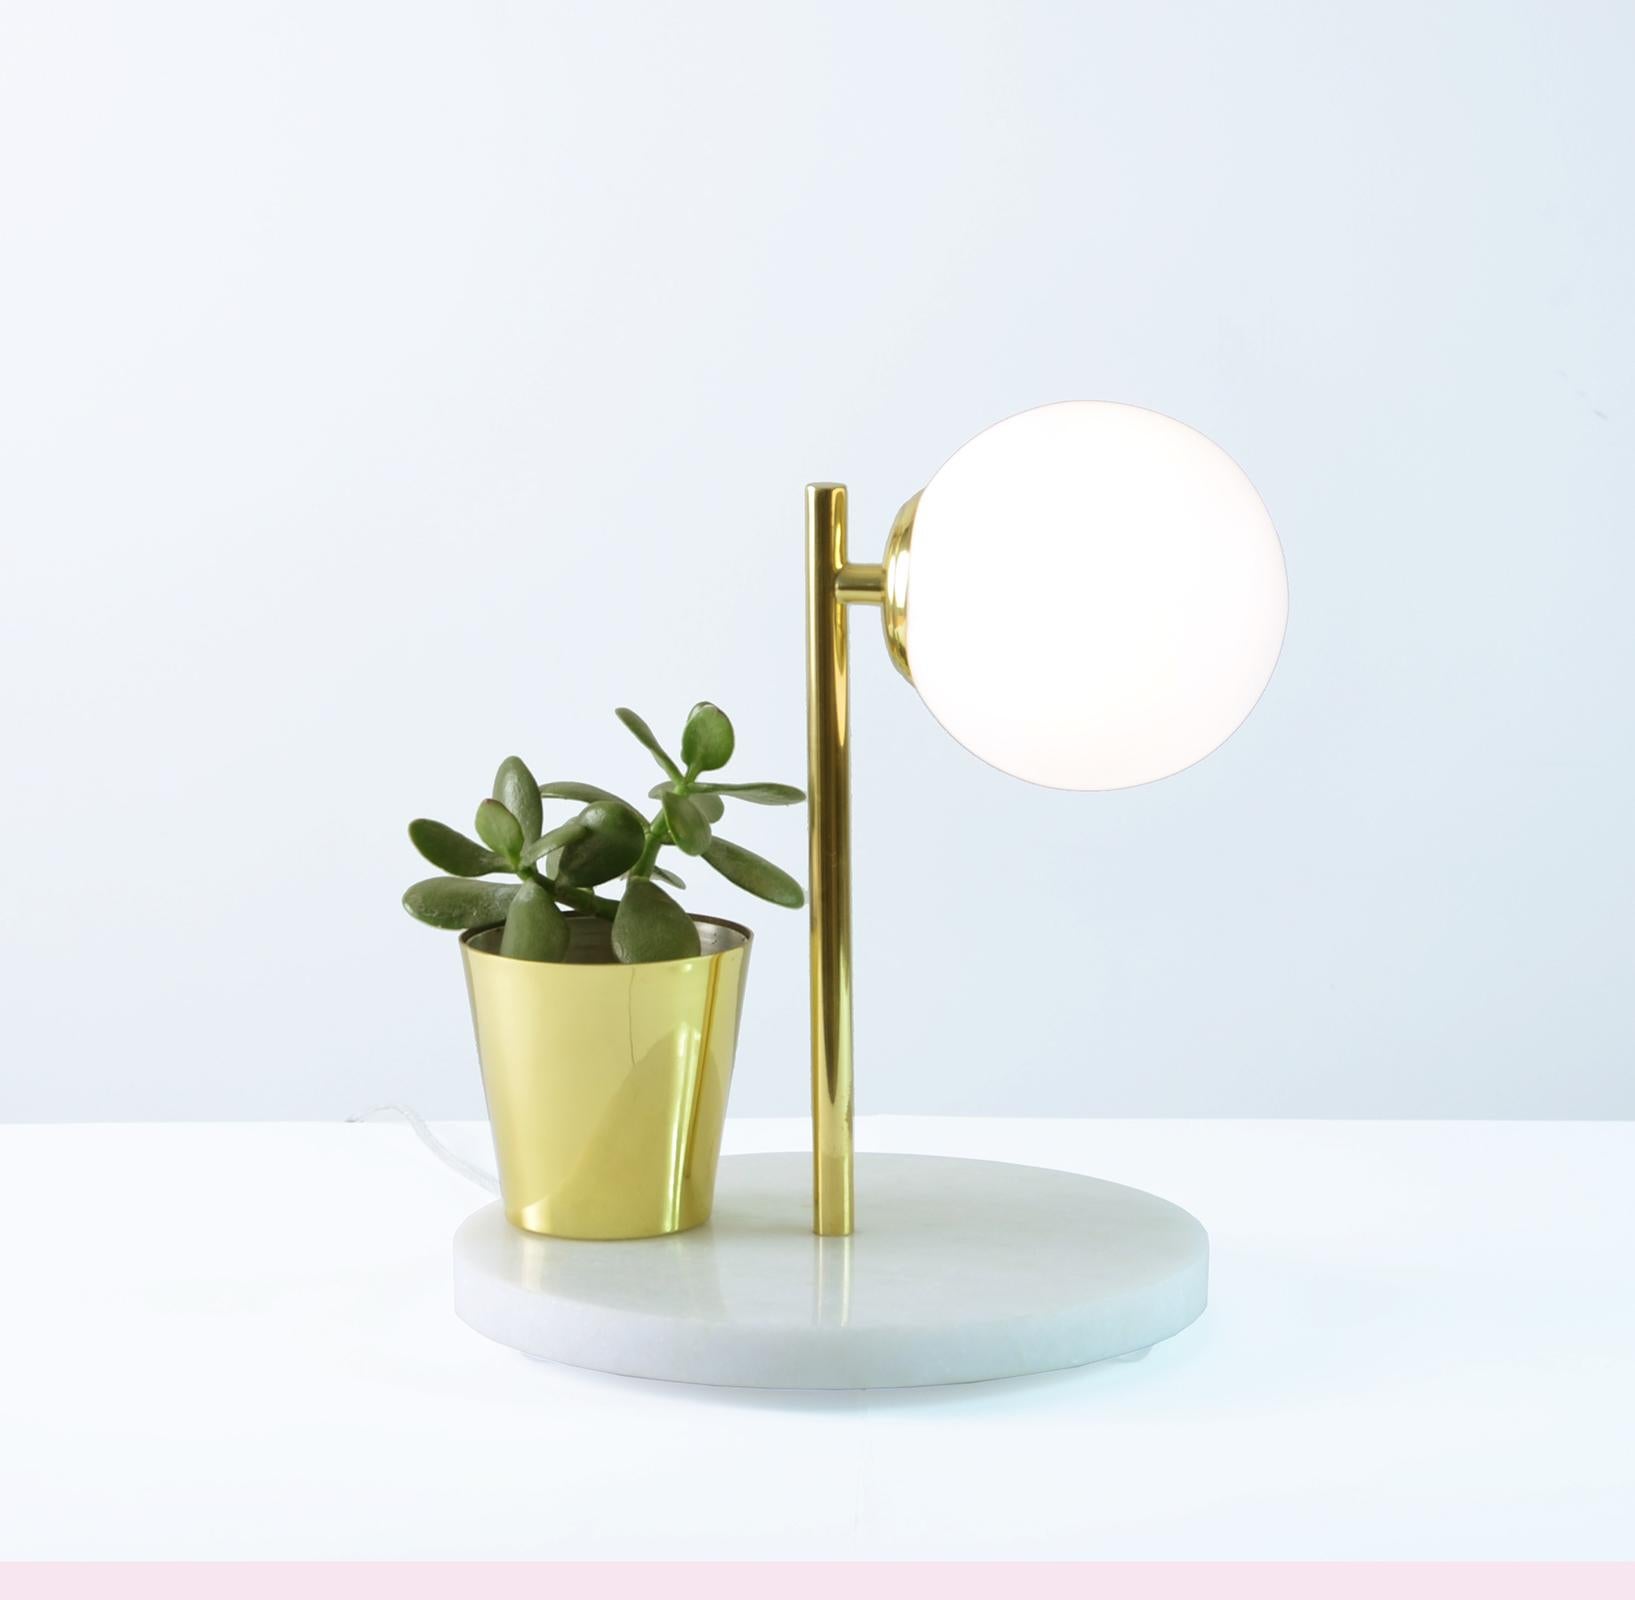 Liliput Contemporary Minimalist Poetic Table Lamp by Cristiana Bertolucci
Original and charming table lamp with marble base, polished brass stem and vase and glass diffuser. The name gives the difference of scale in the story of Gulliver's world.